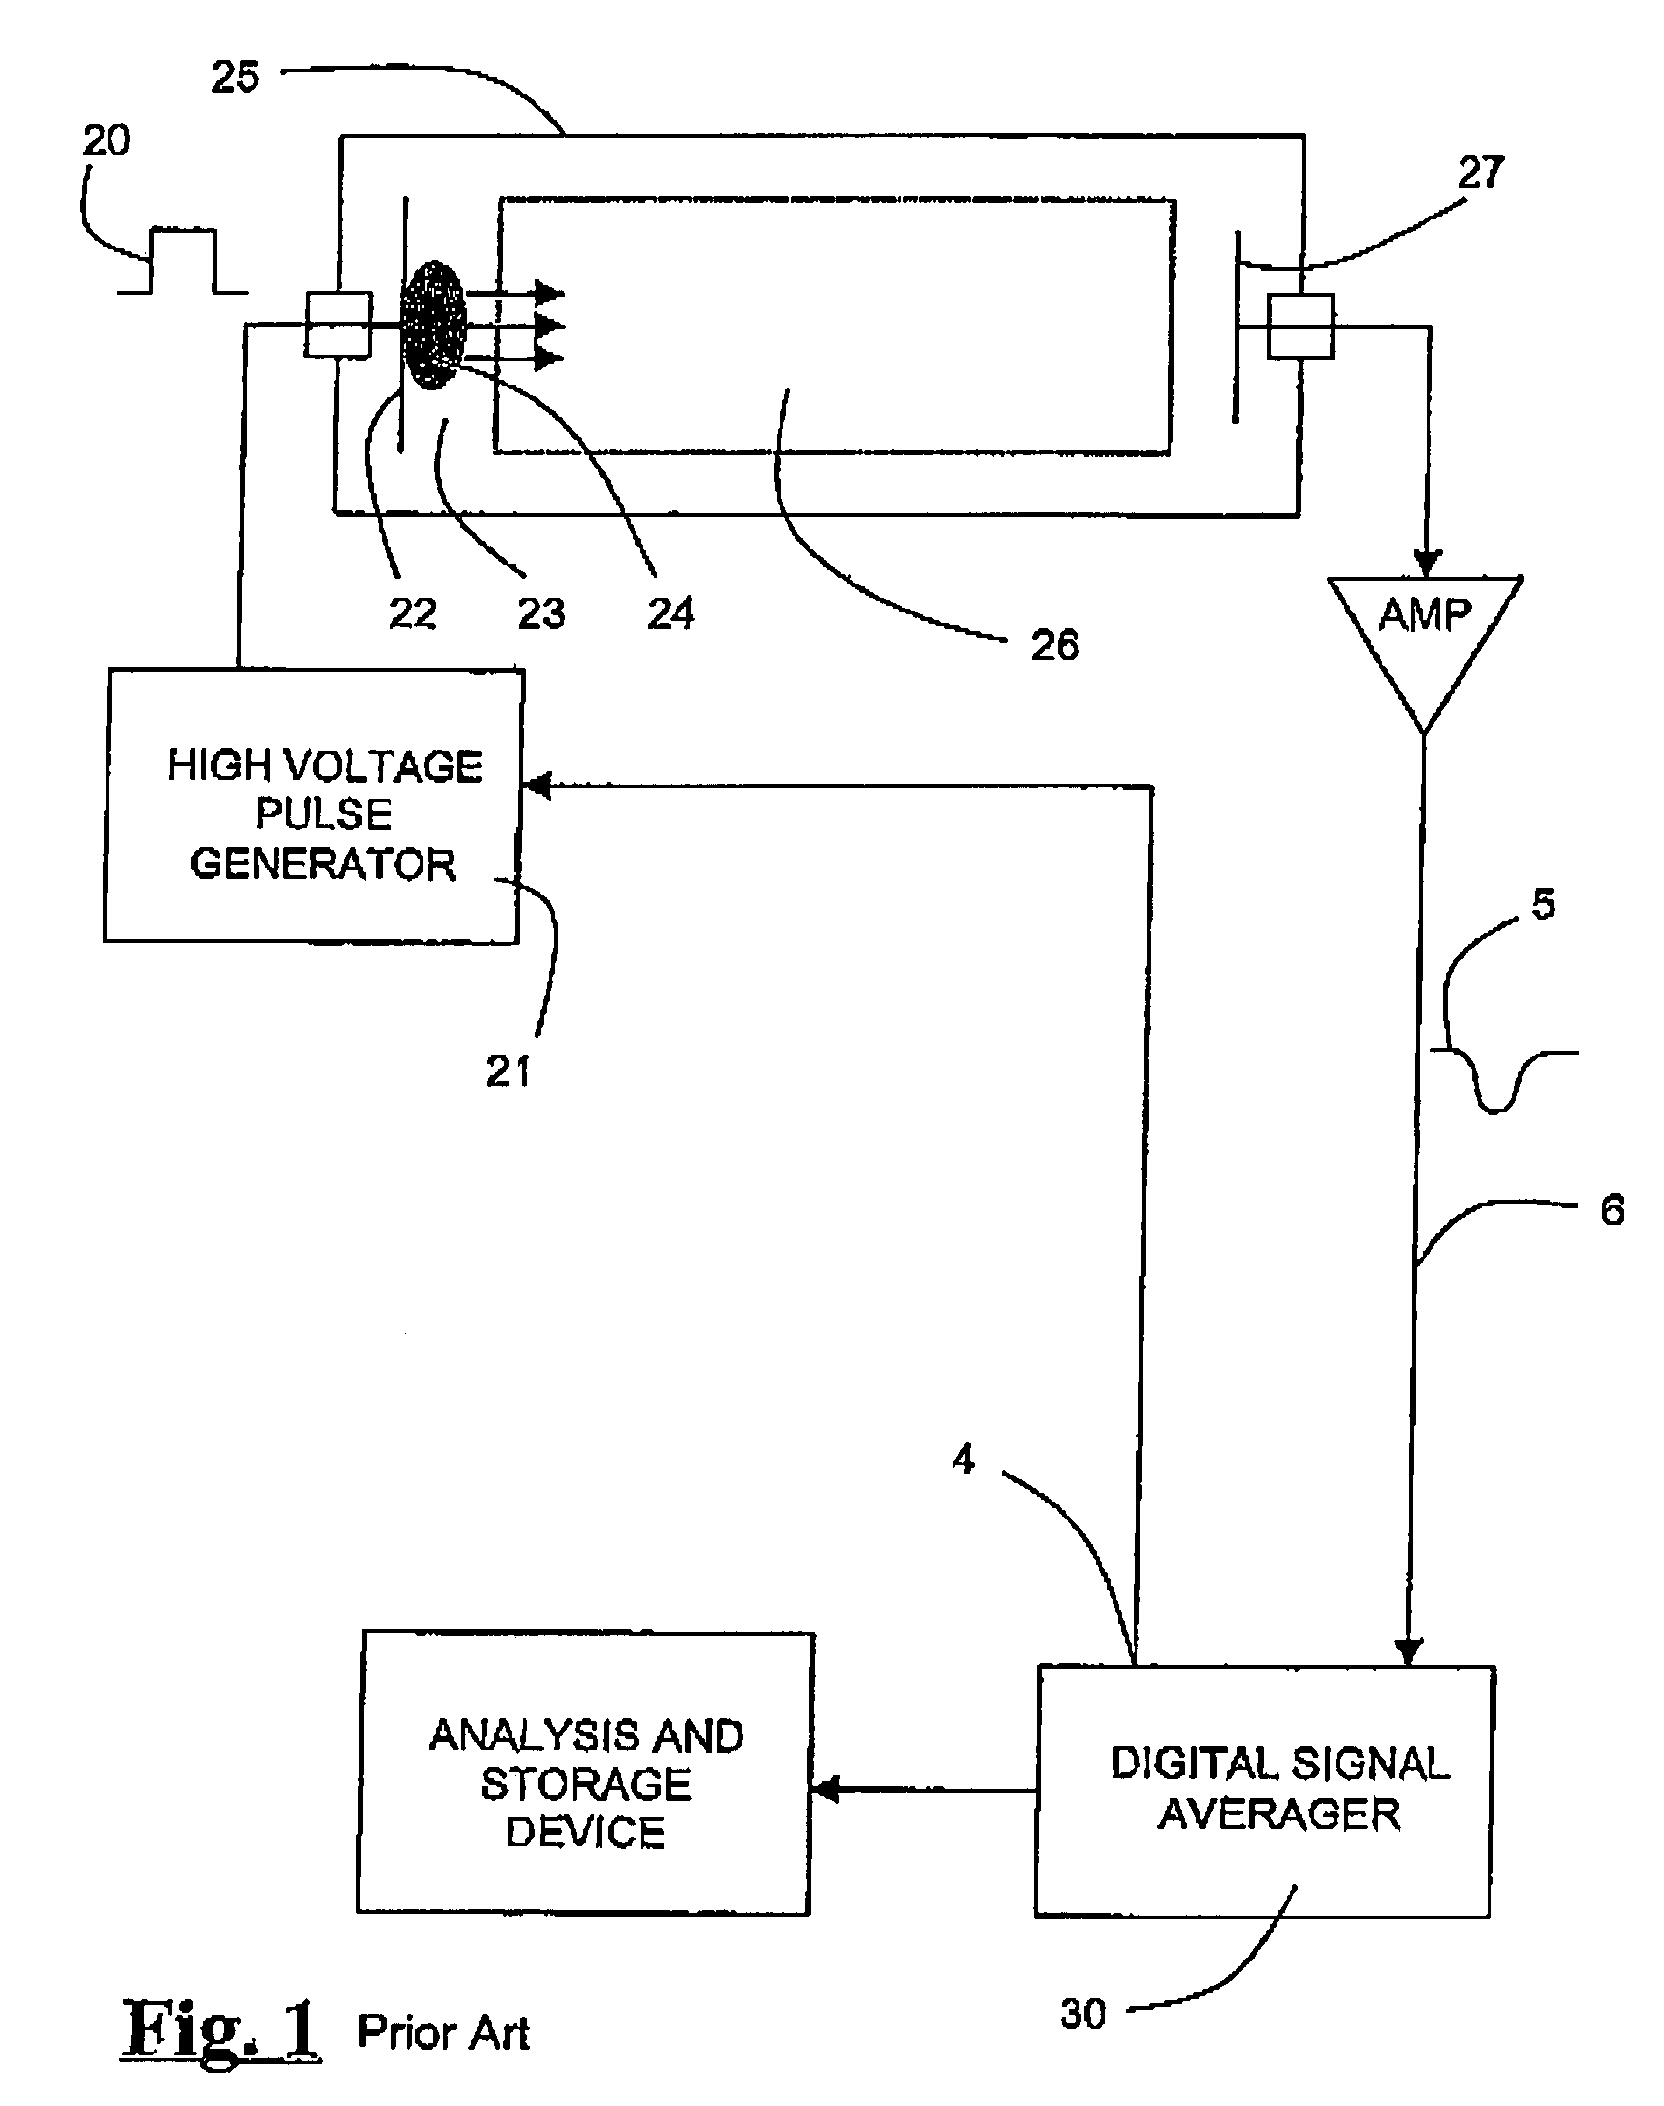 Apparatus and methods for reduction of coherent noise in a digital signal averager